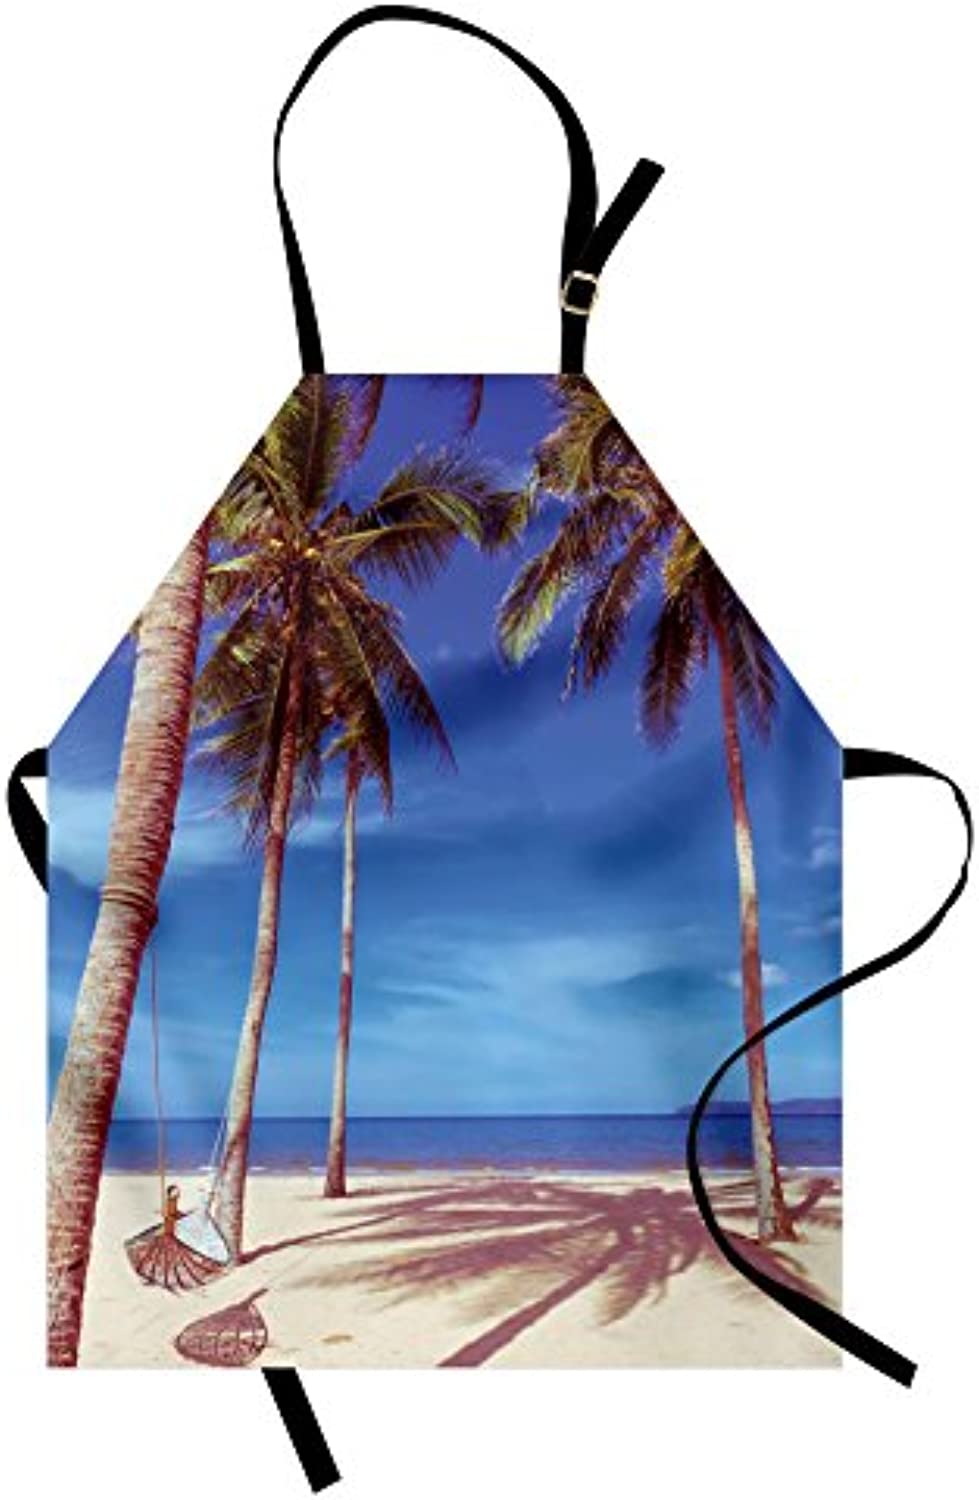 Granbey Beach Apron  Image of an Hammock at Summer Tropical Coast by the Ocean Palms Surreal  Unisex Kitchen Bib with Adjustable Neck for Cooking Gardening  Adult Size  Cream Green